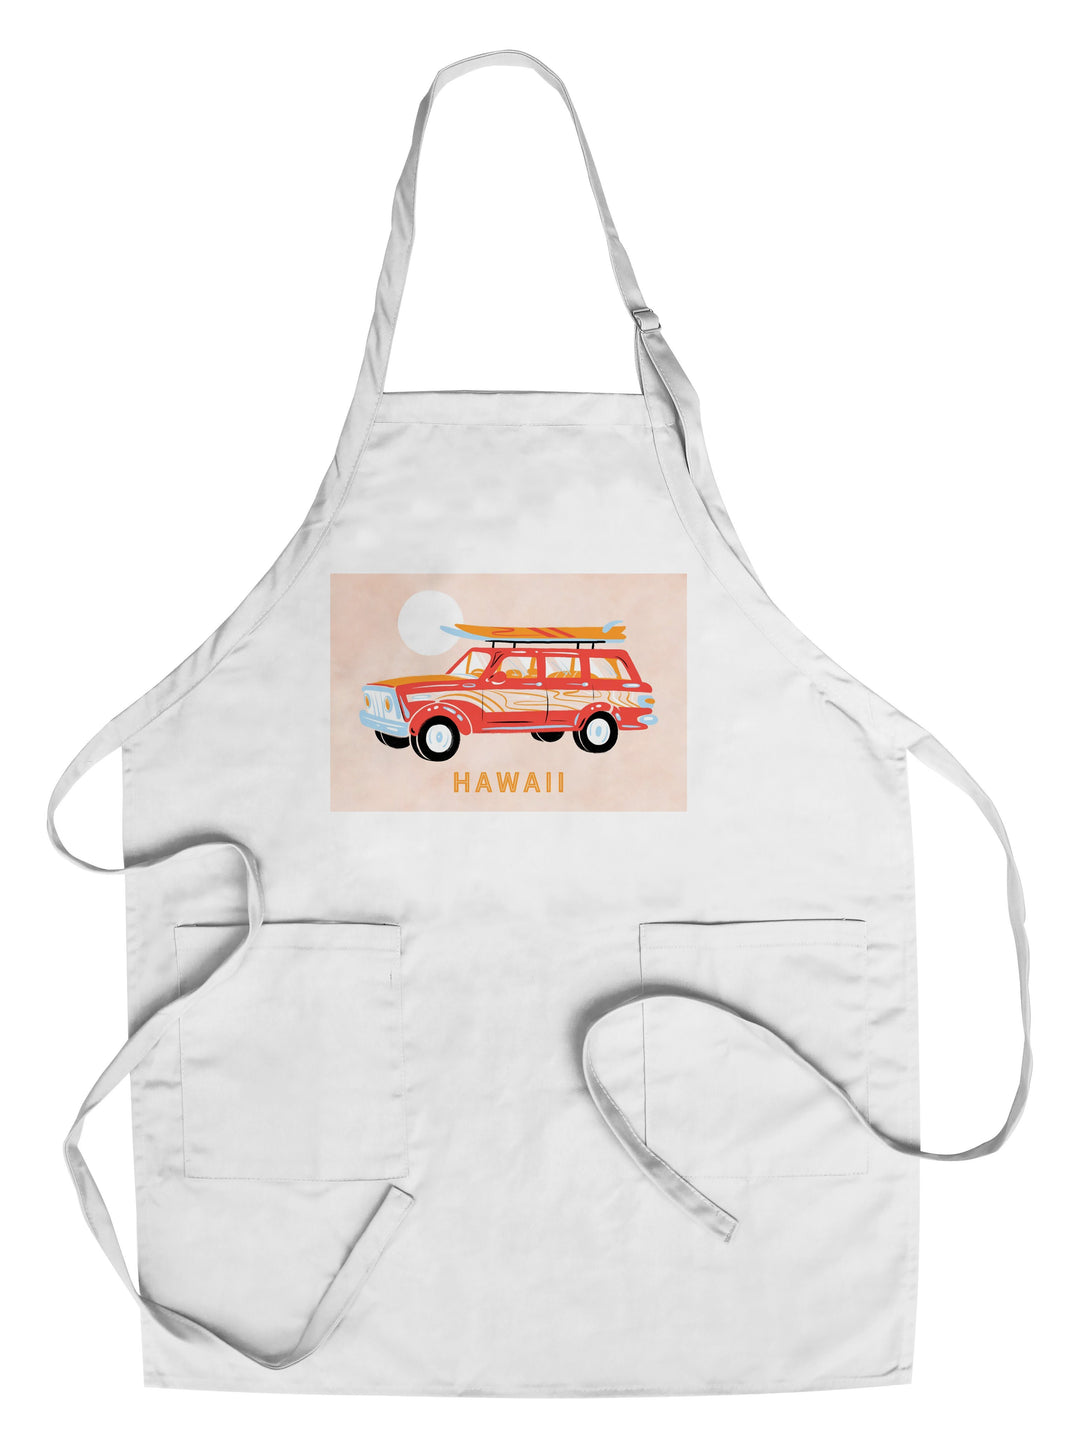 Hawaii, Secret Surf Spot Collection, Woody Wagon and Surfboards, Lantern Press Artwork, Towels and Aprons Kitchen Lantern Press Chef's Apron 